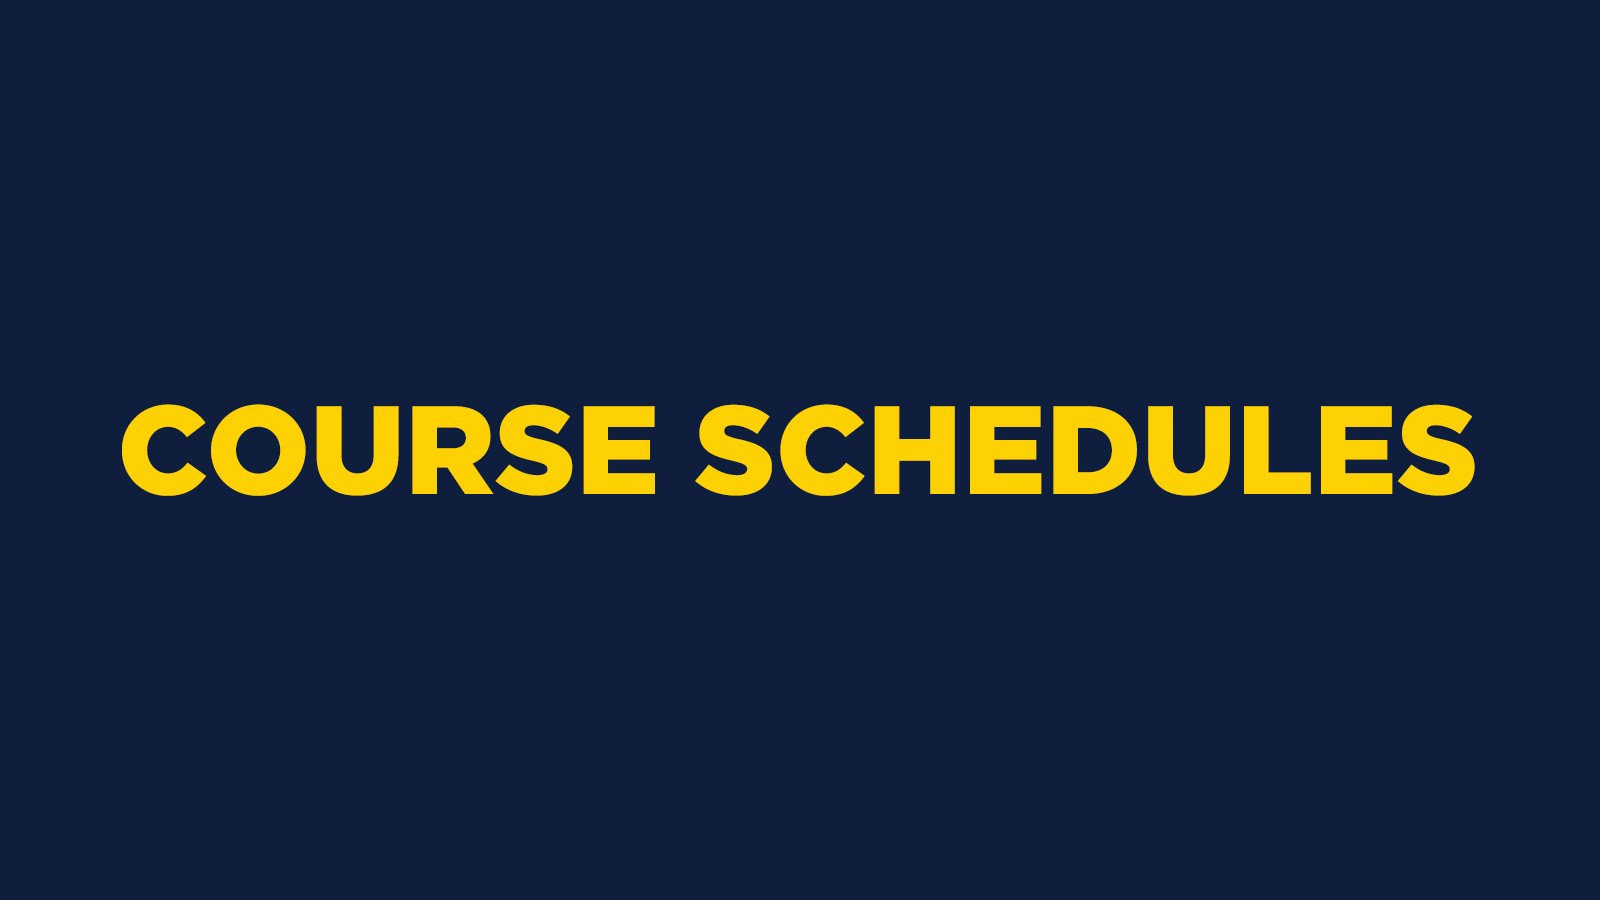 COURSE SCHEDULES